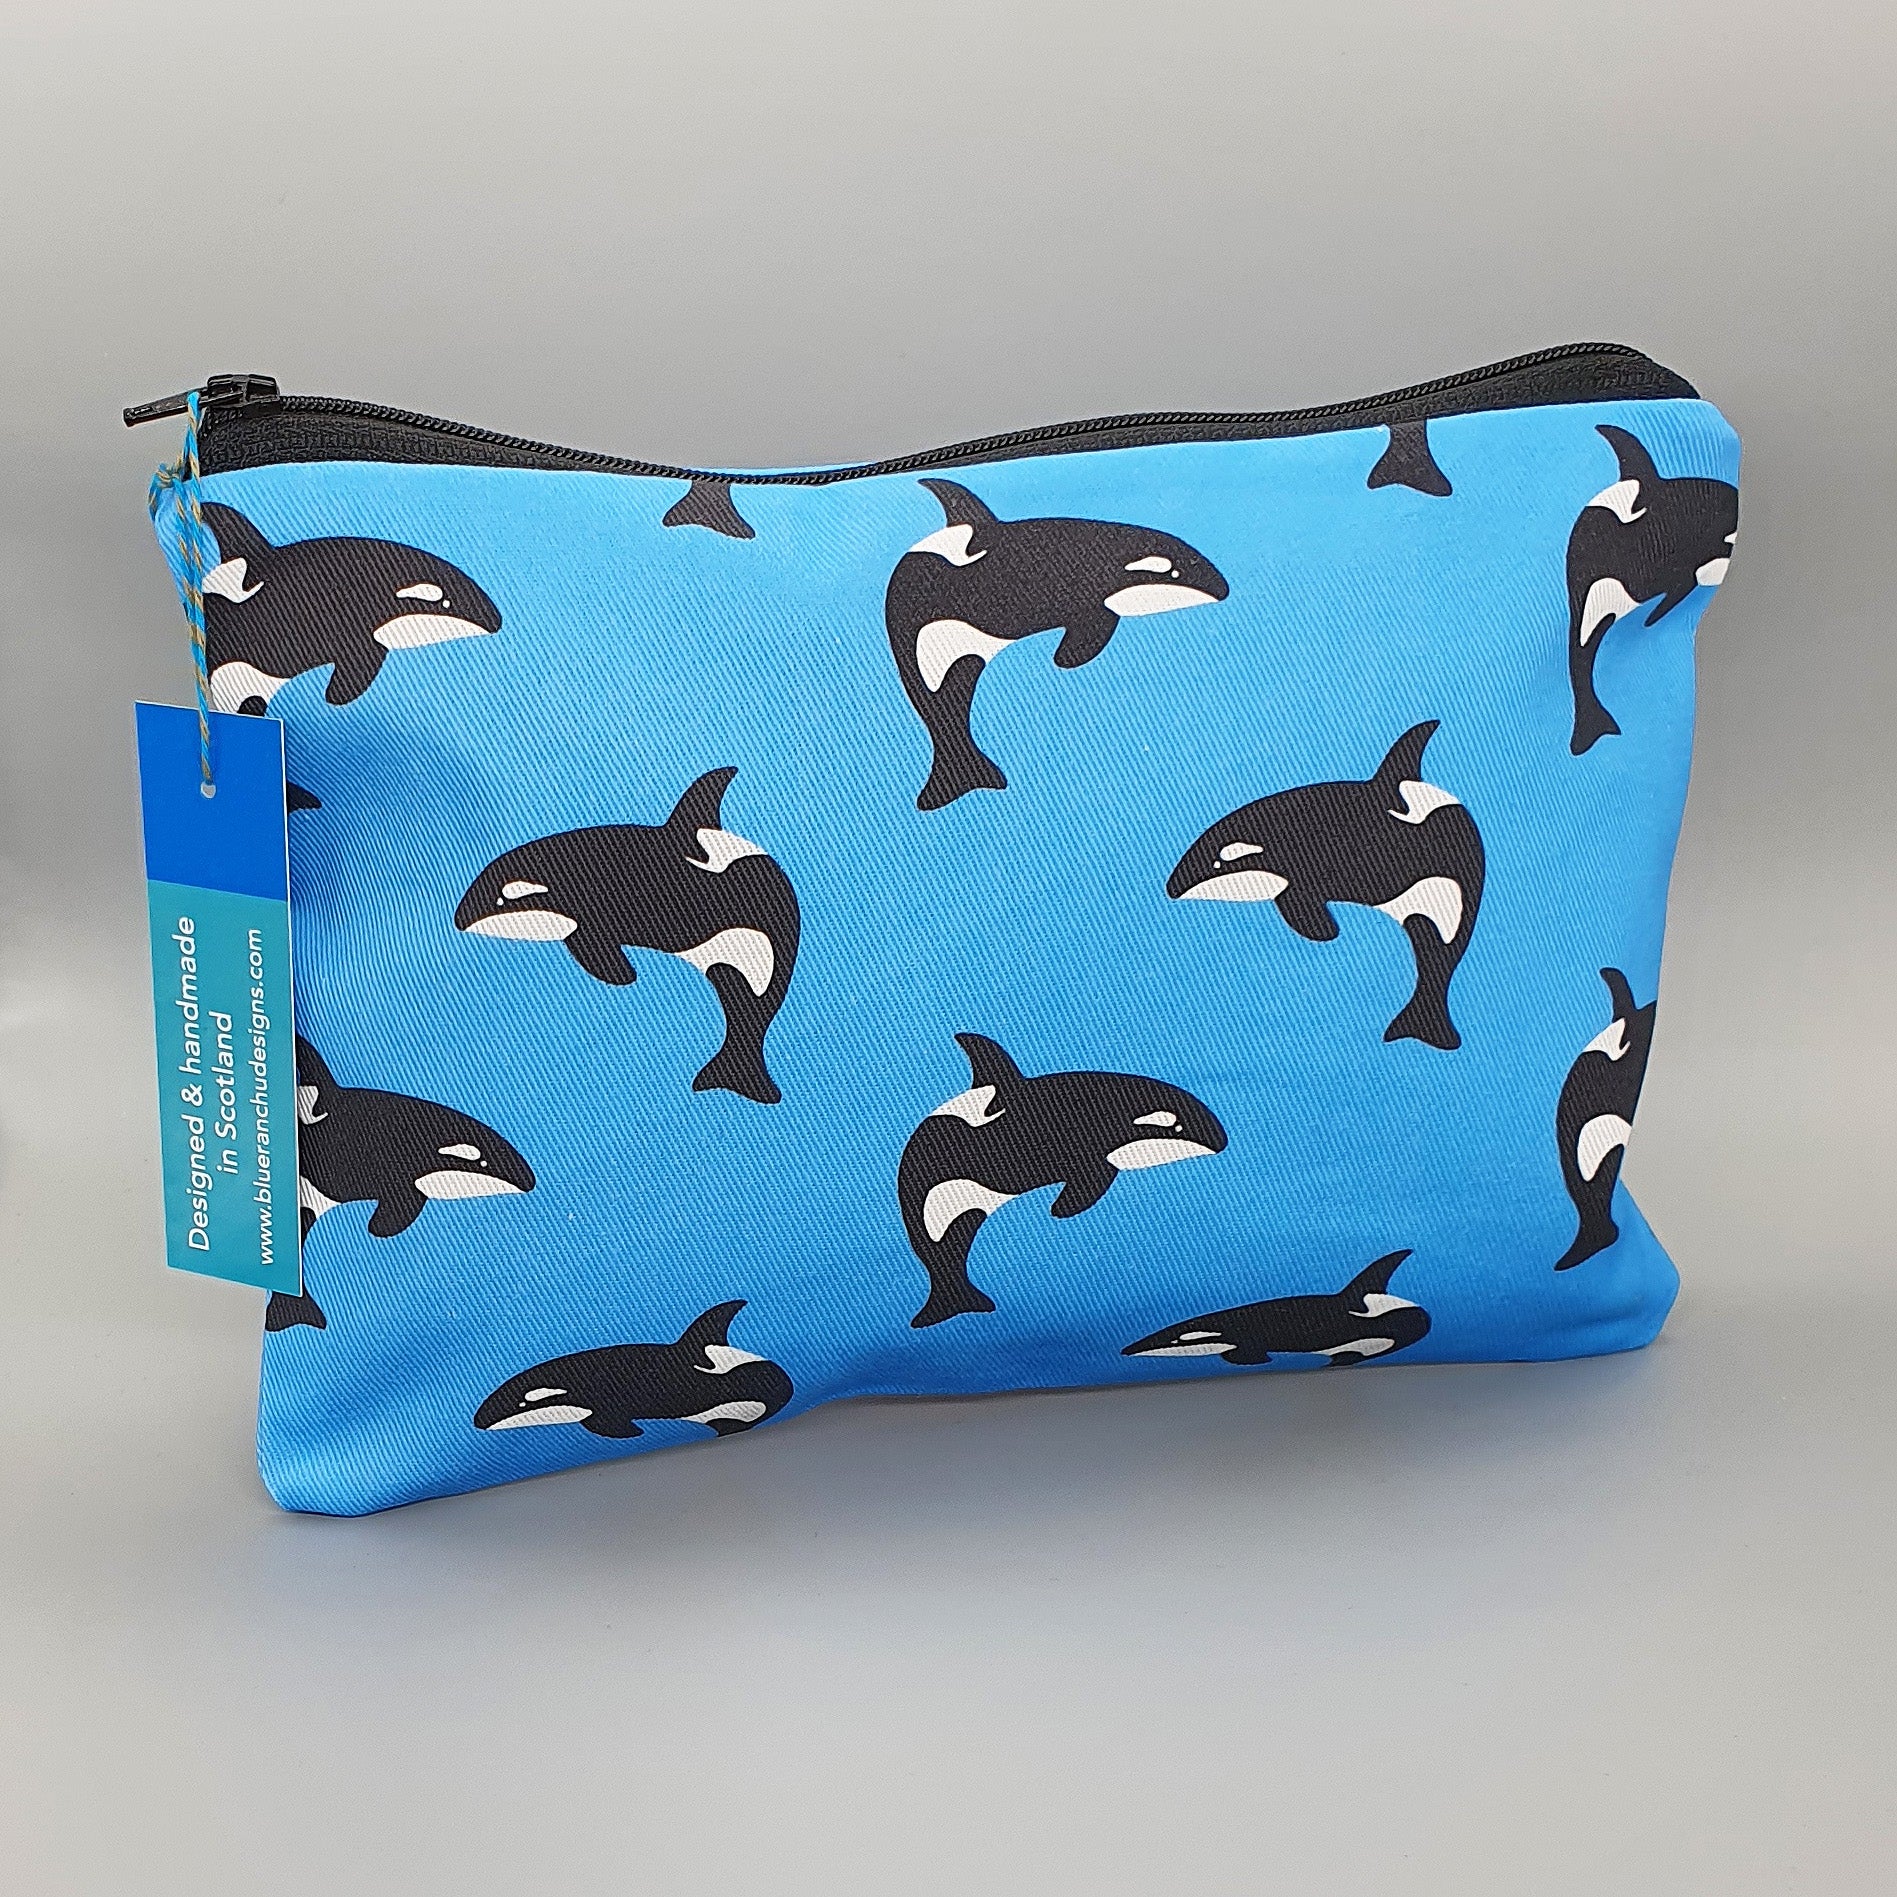 Orca whale accessories bag